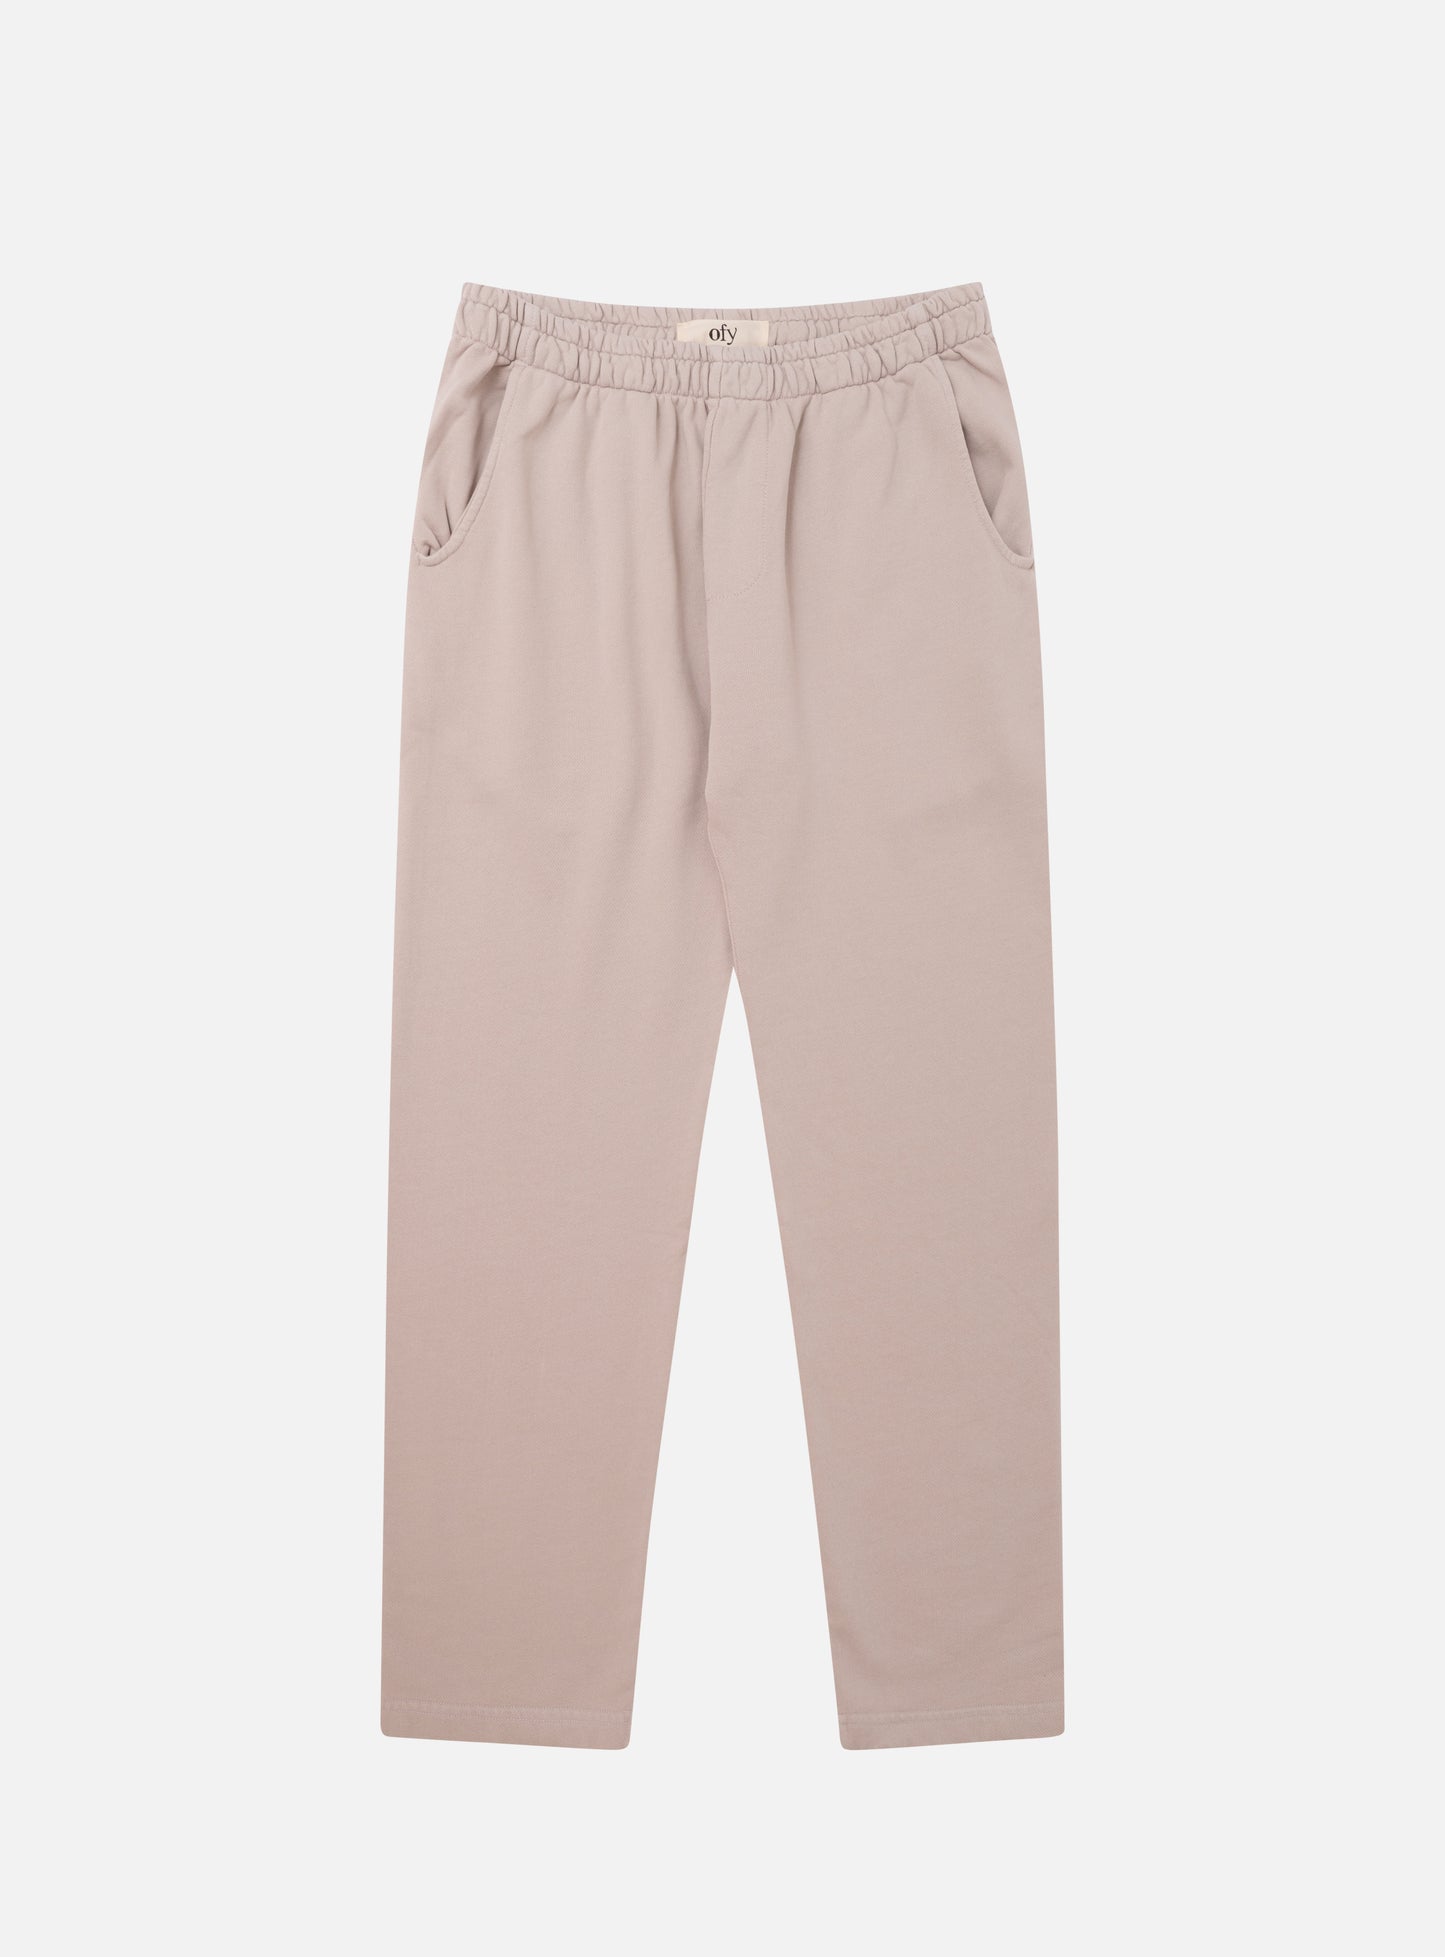 Cruise Pant - Perfectly Pale